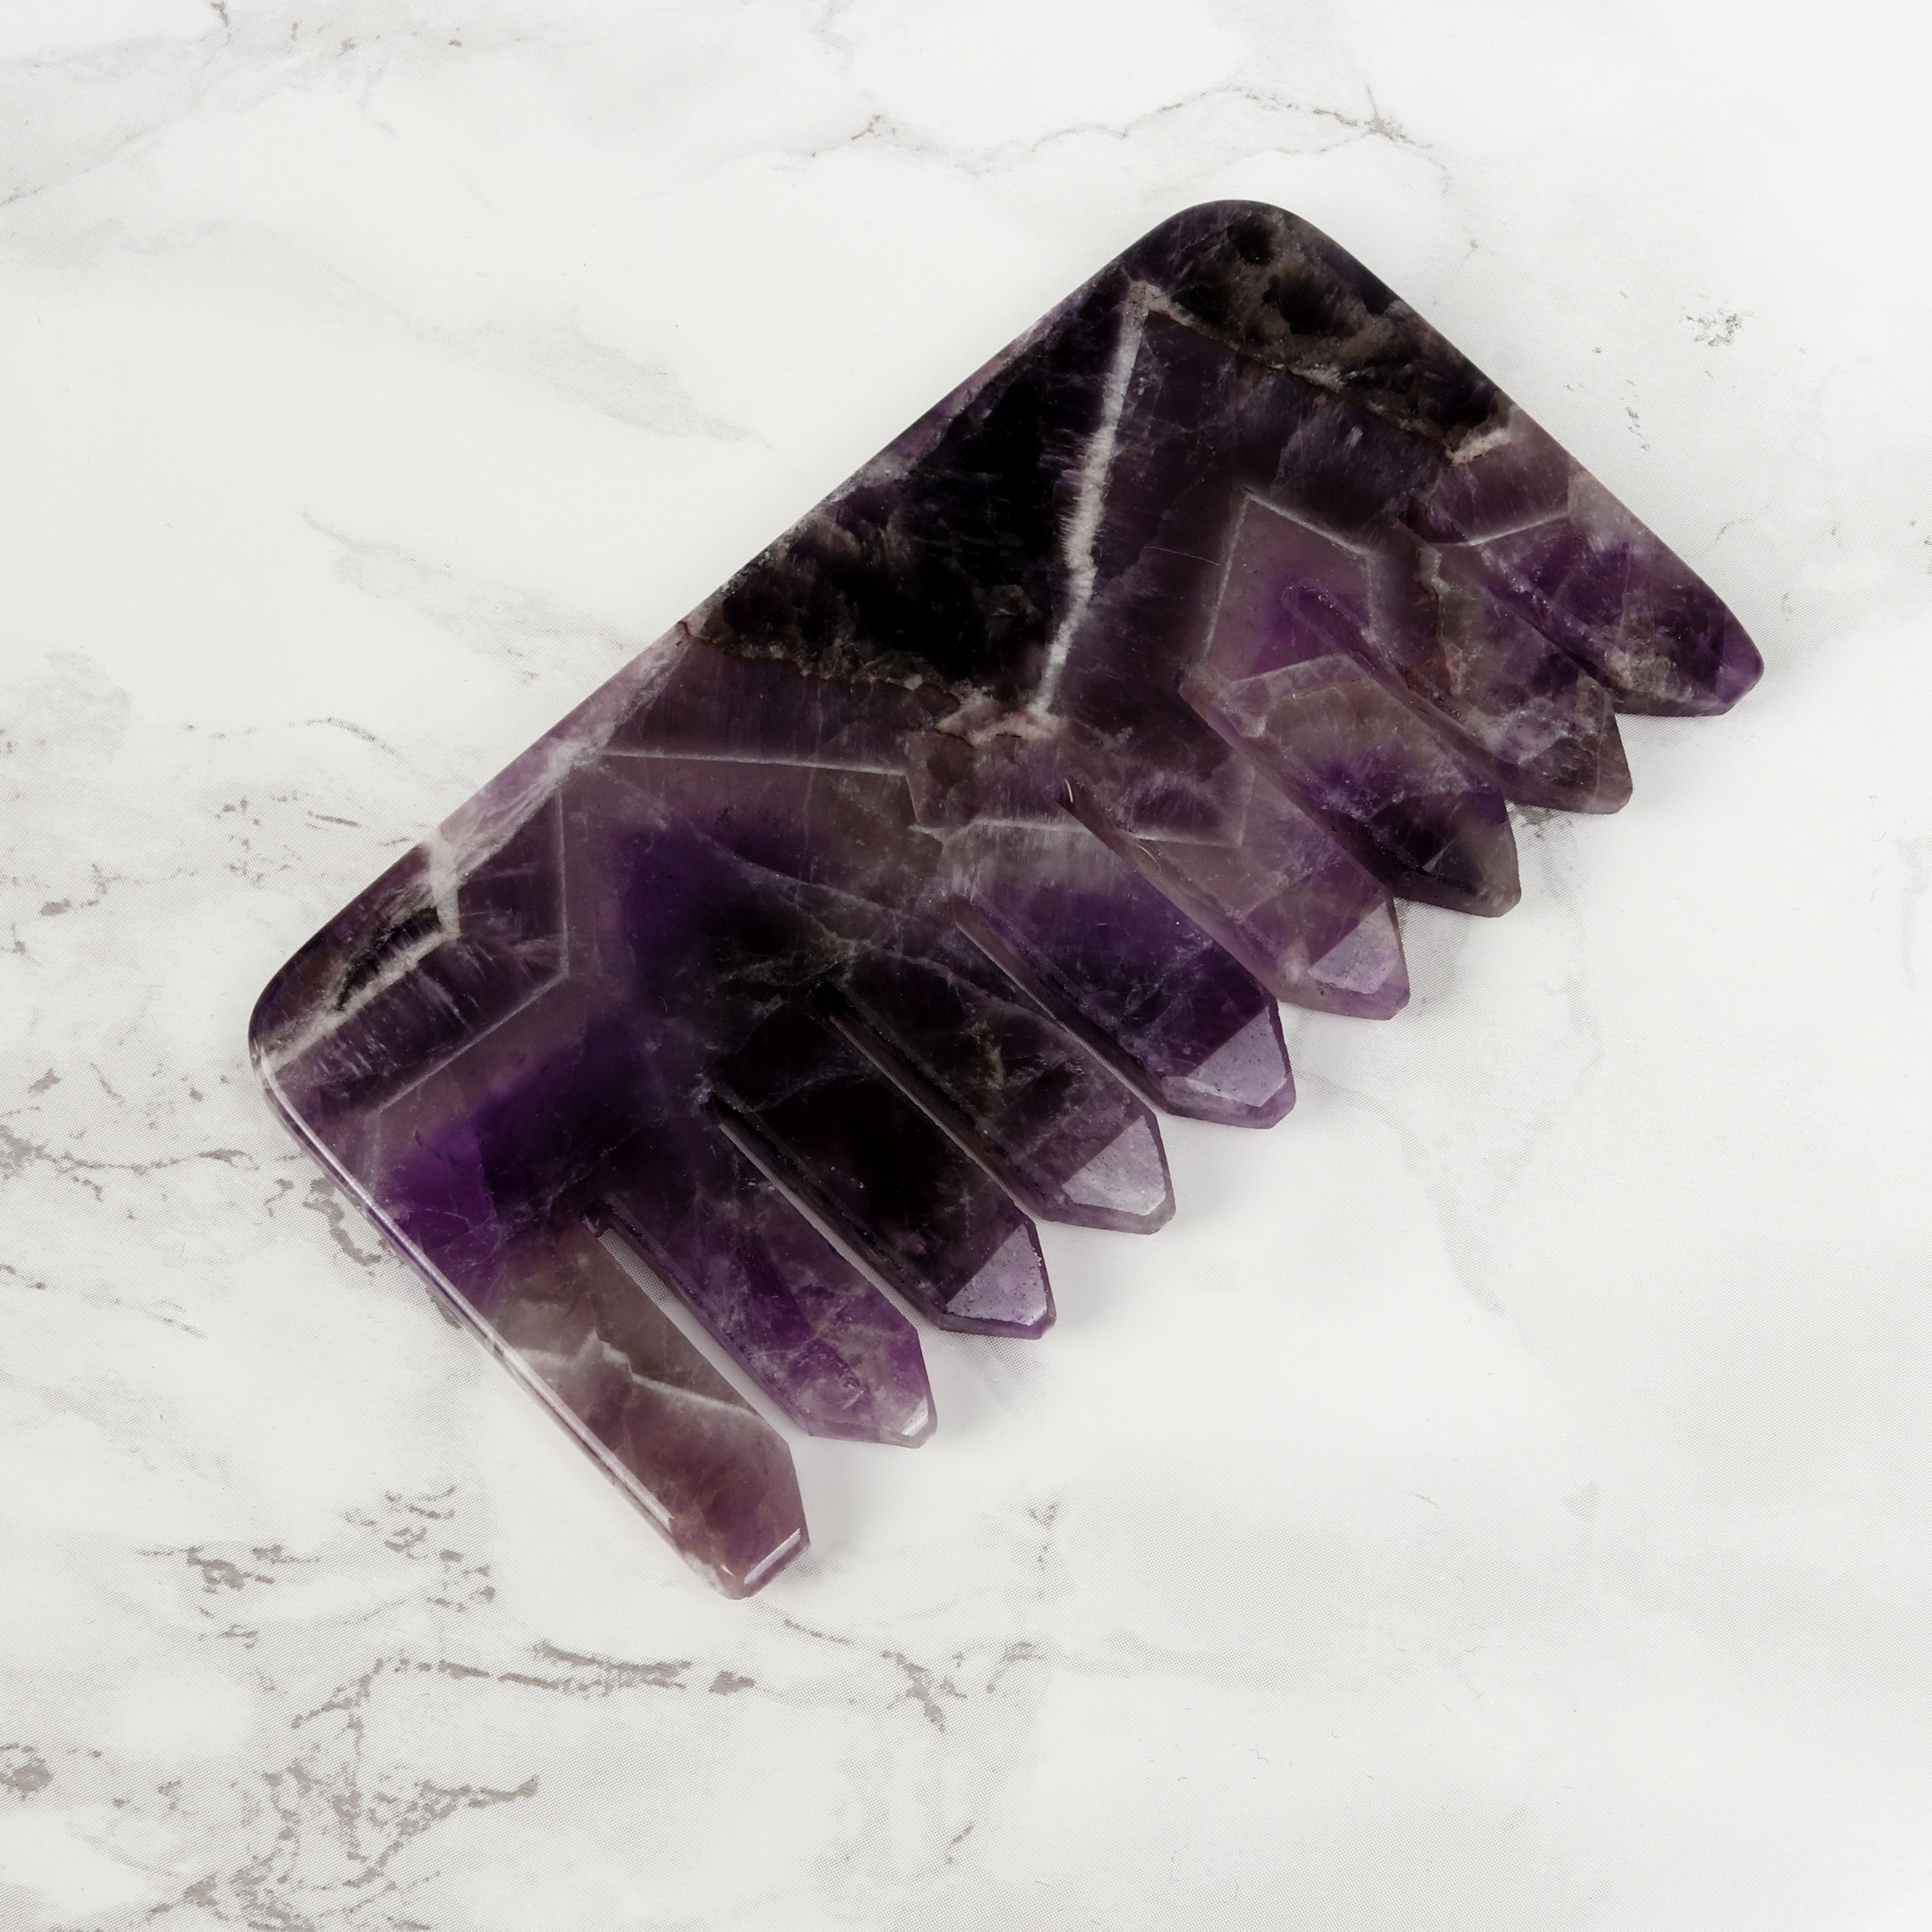 Amethyst Crystal Hair Comb on marble background